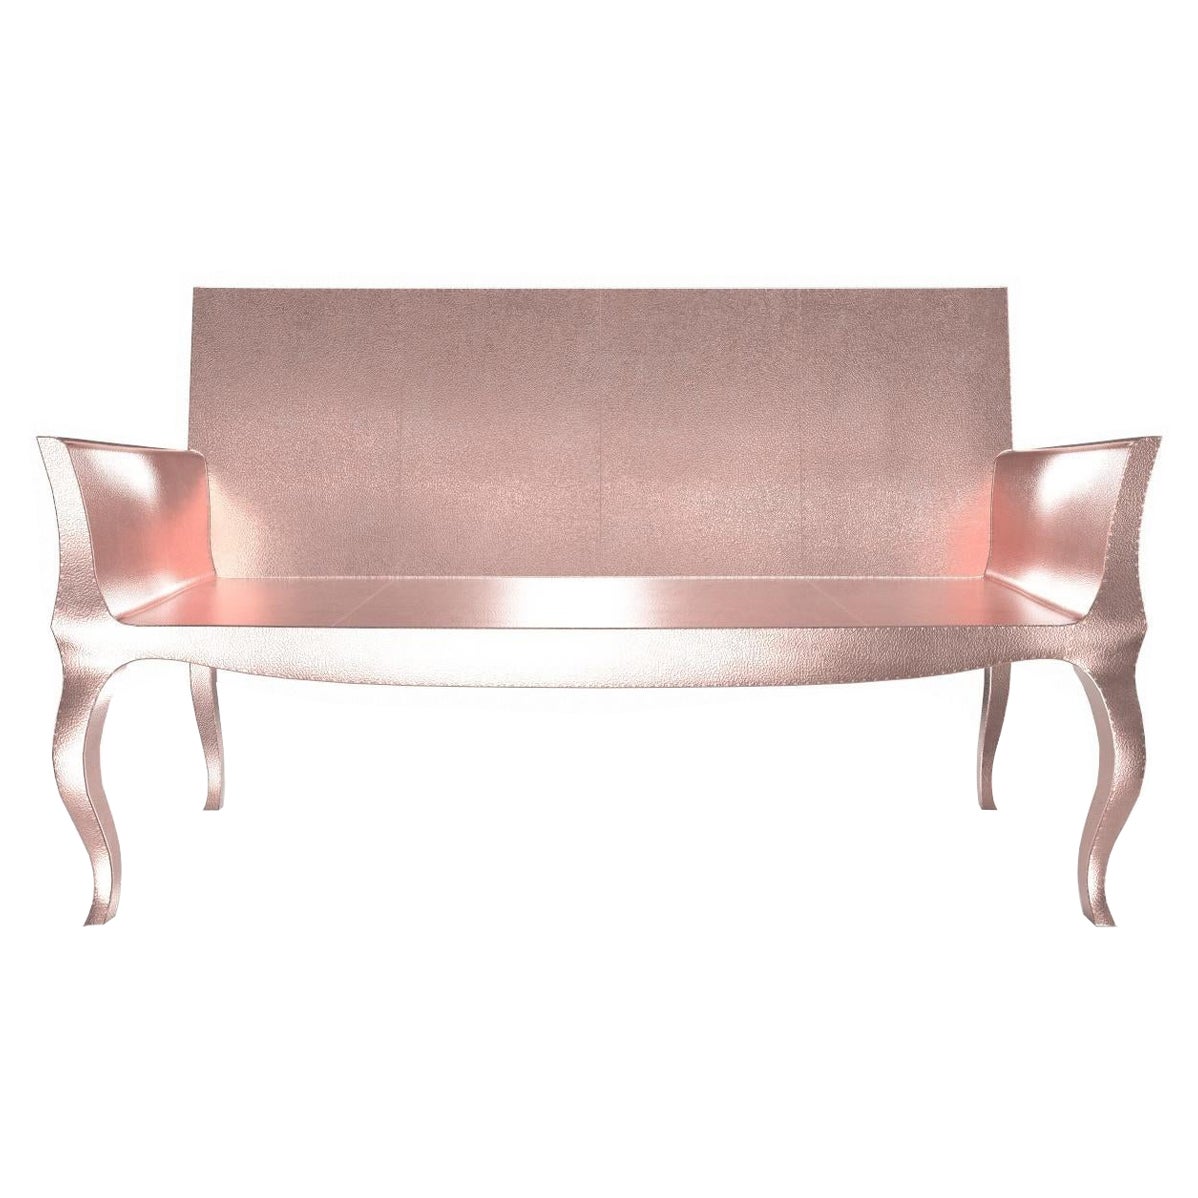 Louise Settee Art Deco Loveseats in Fine Hammered Copper by Paul Mathieu For Sale